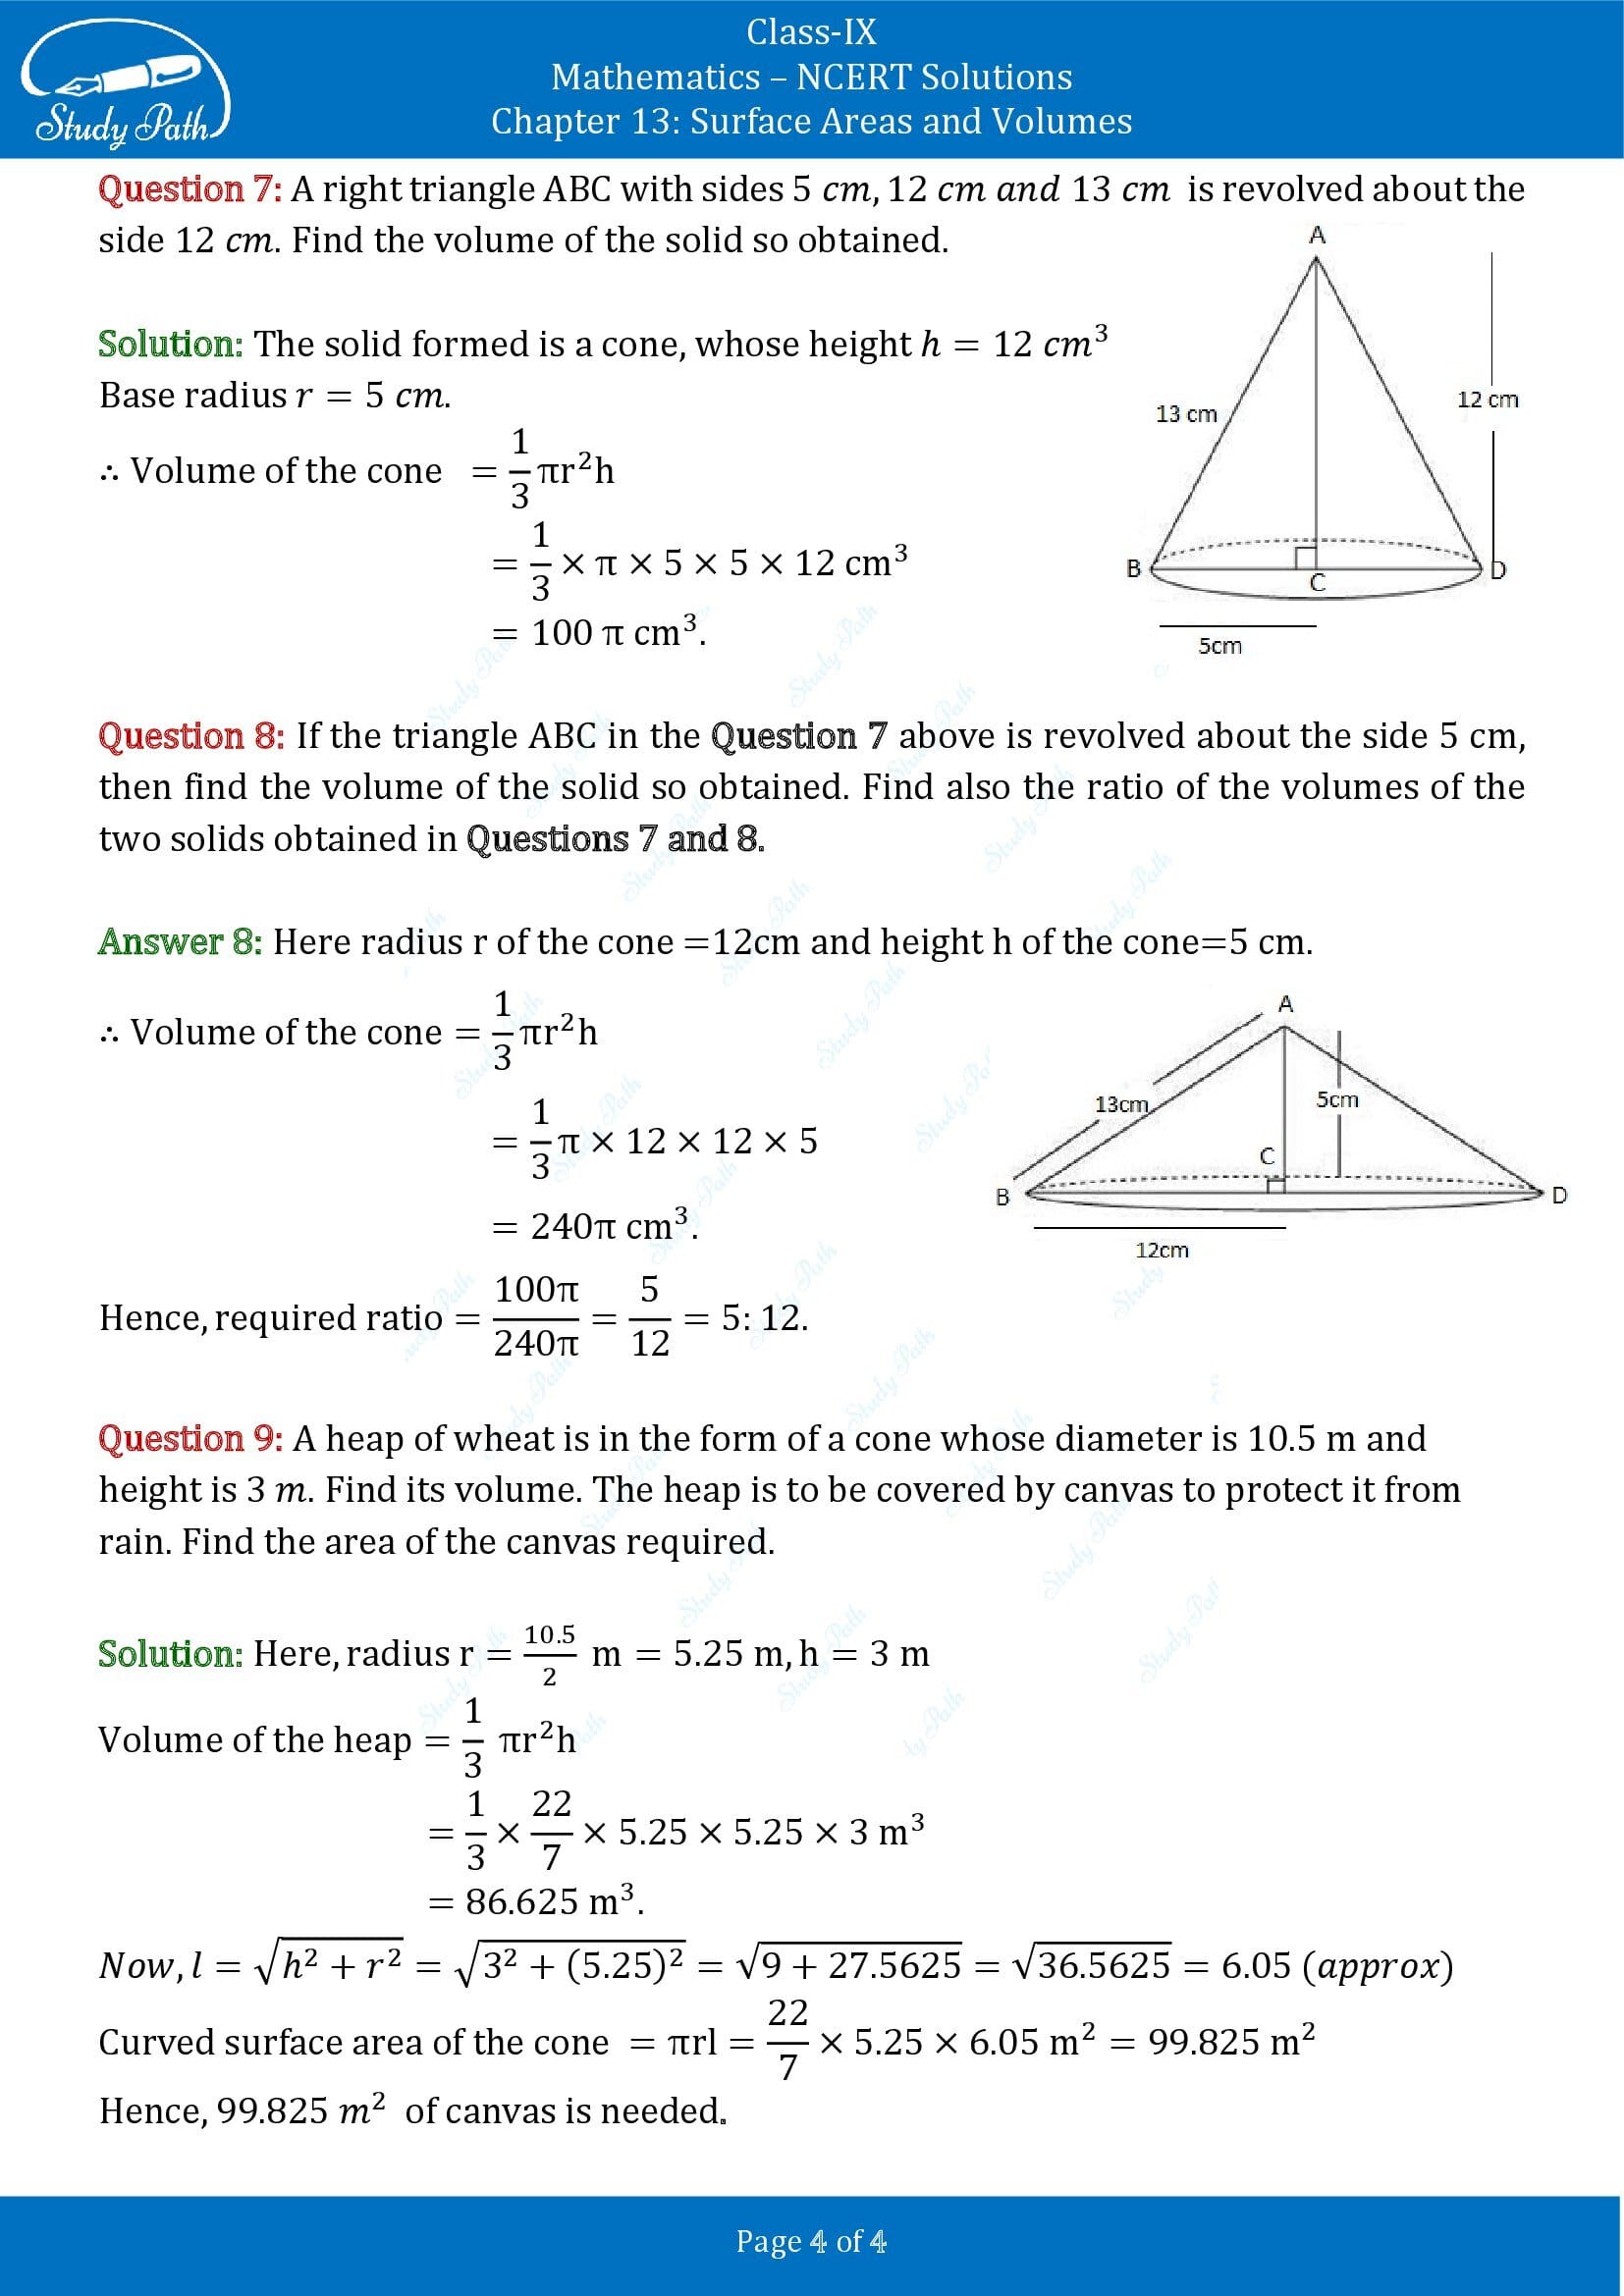 NCERT Solutions for Class 9 Maths Chapter 13 Surface Areas and Volumes Exercise 13.7 00004